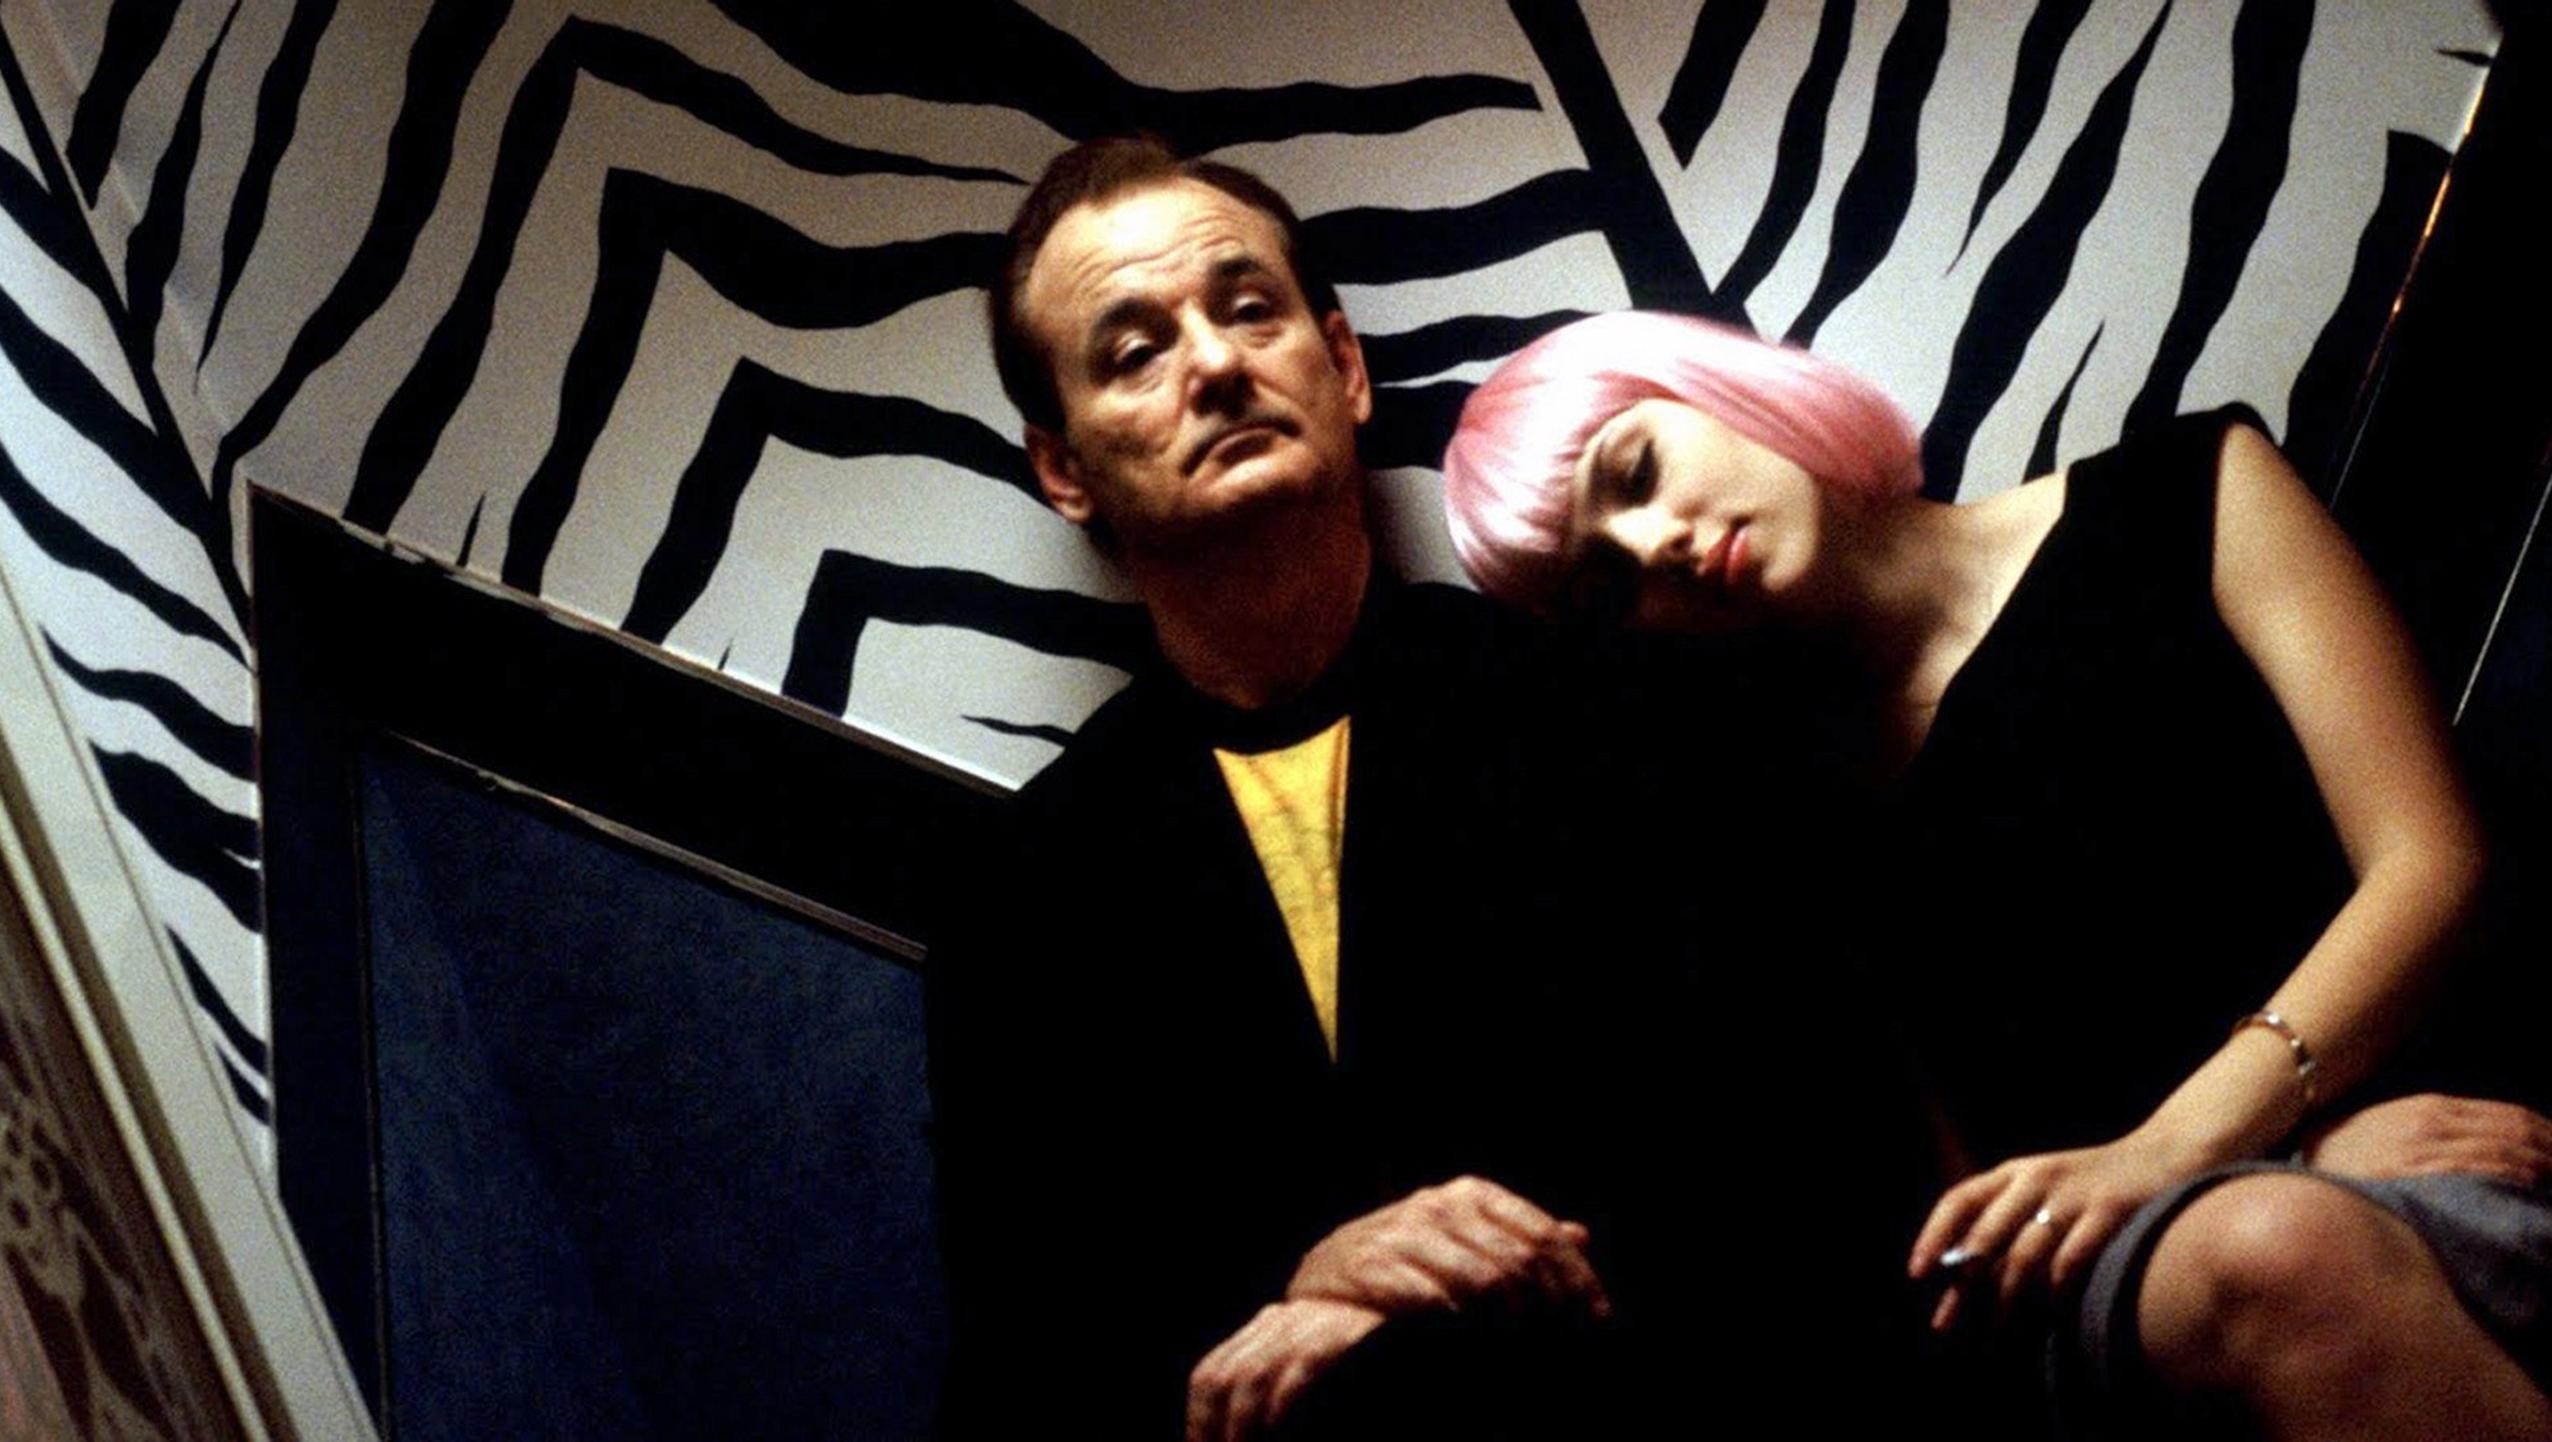 Bill Murray, Movies, Lost in Translation, Top free backgrounds, 2560x1450 HD Desktop